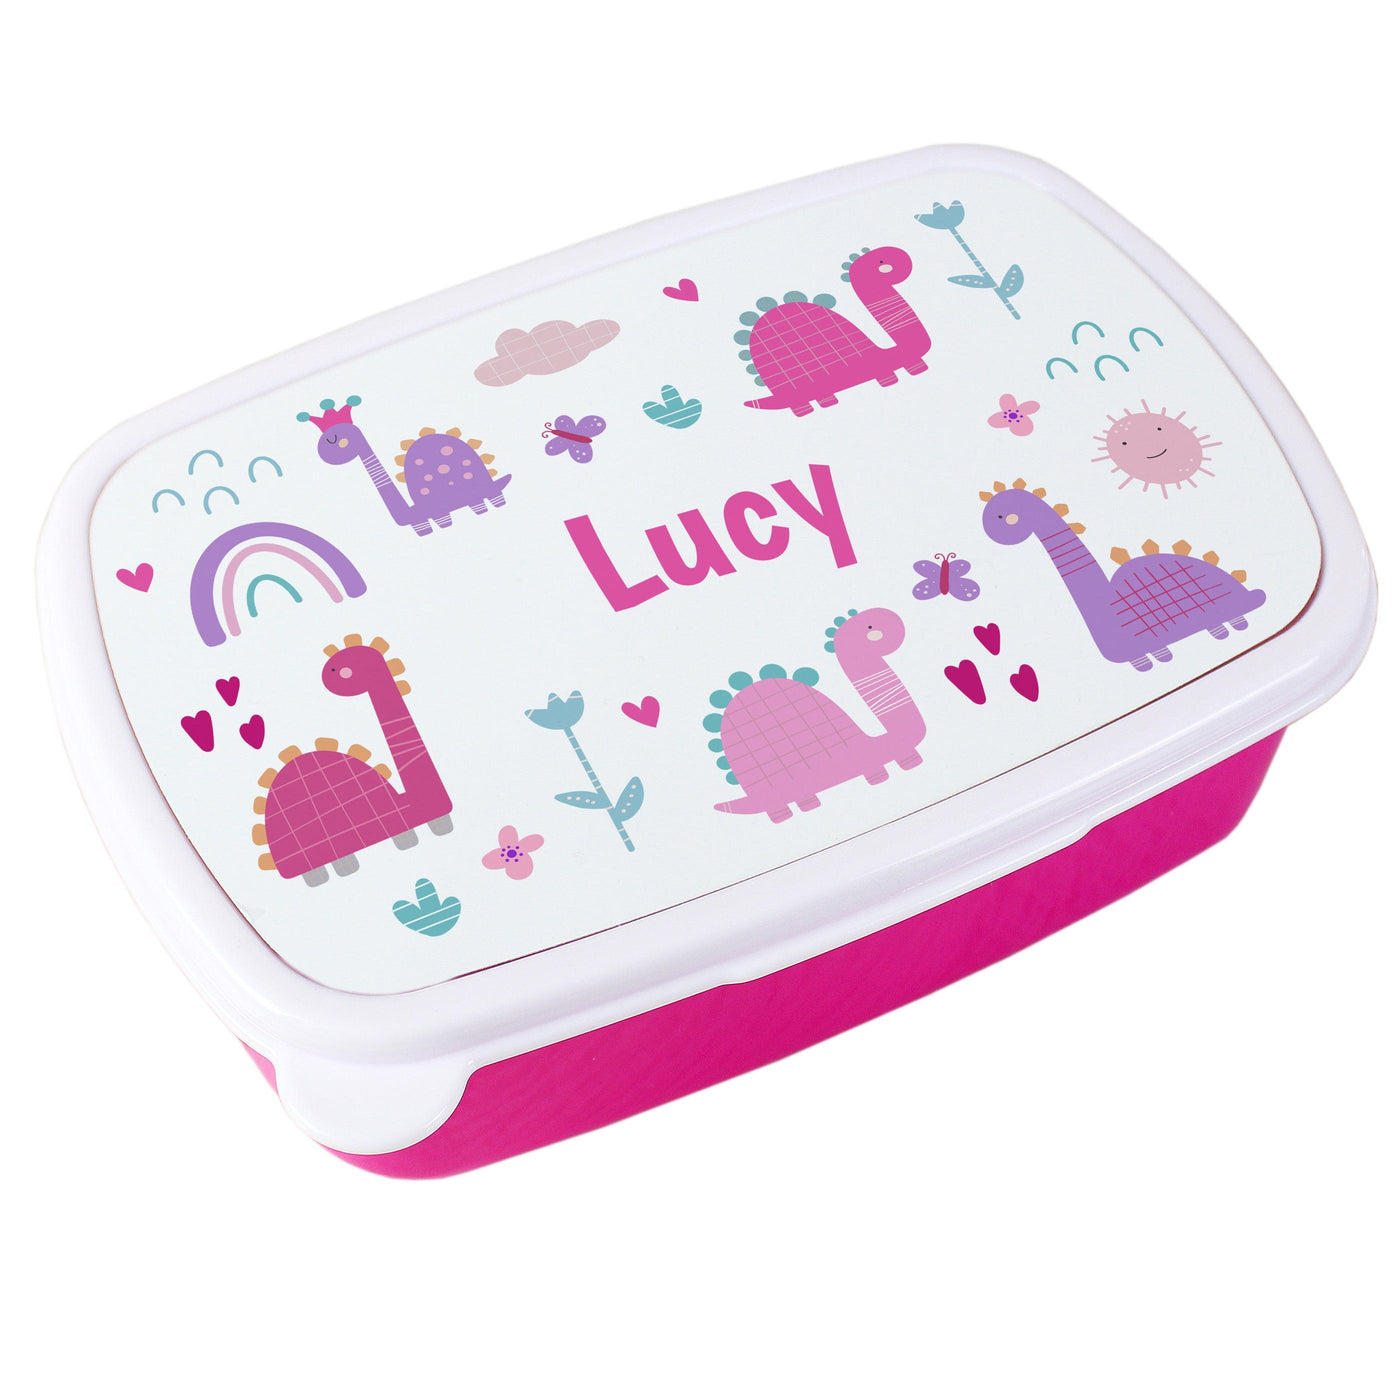 Personalised Girly Dinosaurs Name Only Pink Lunch Box - Shop Personalised Gifts